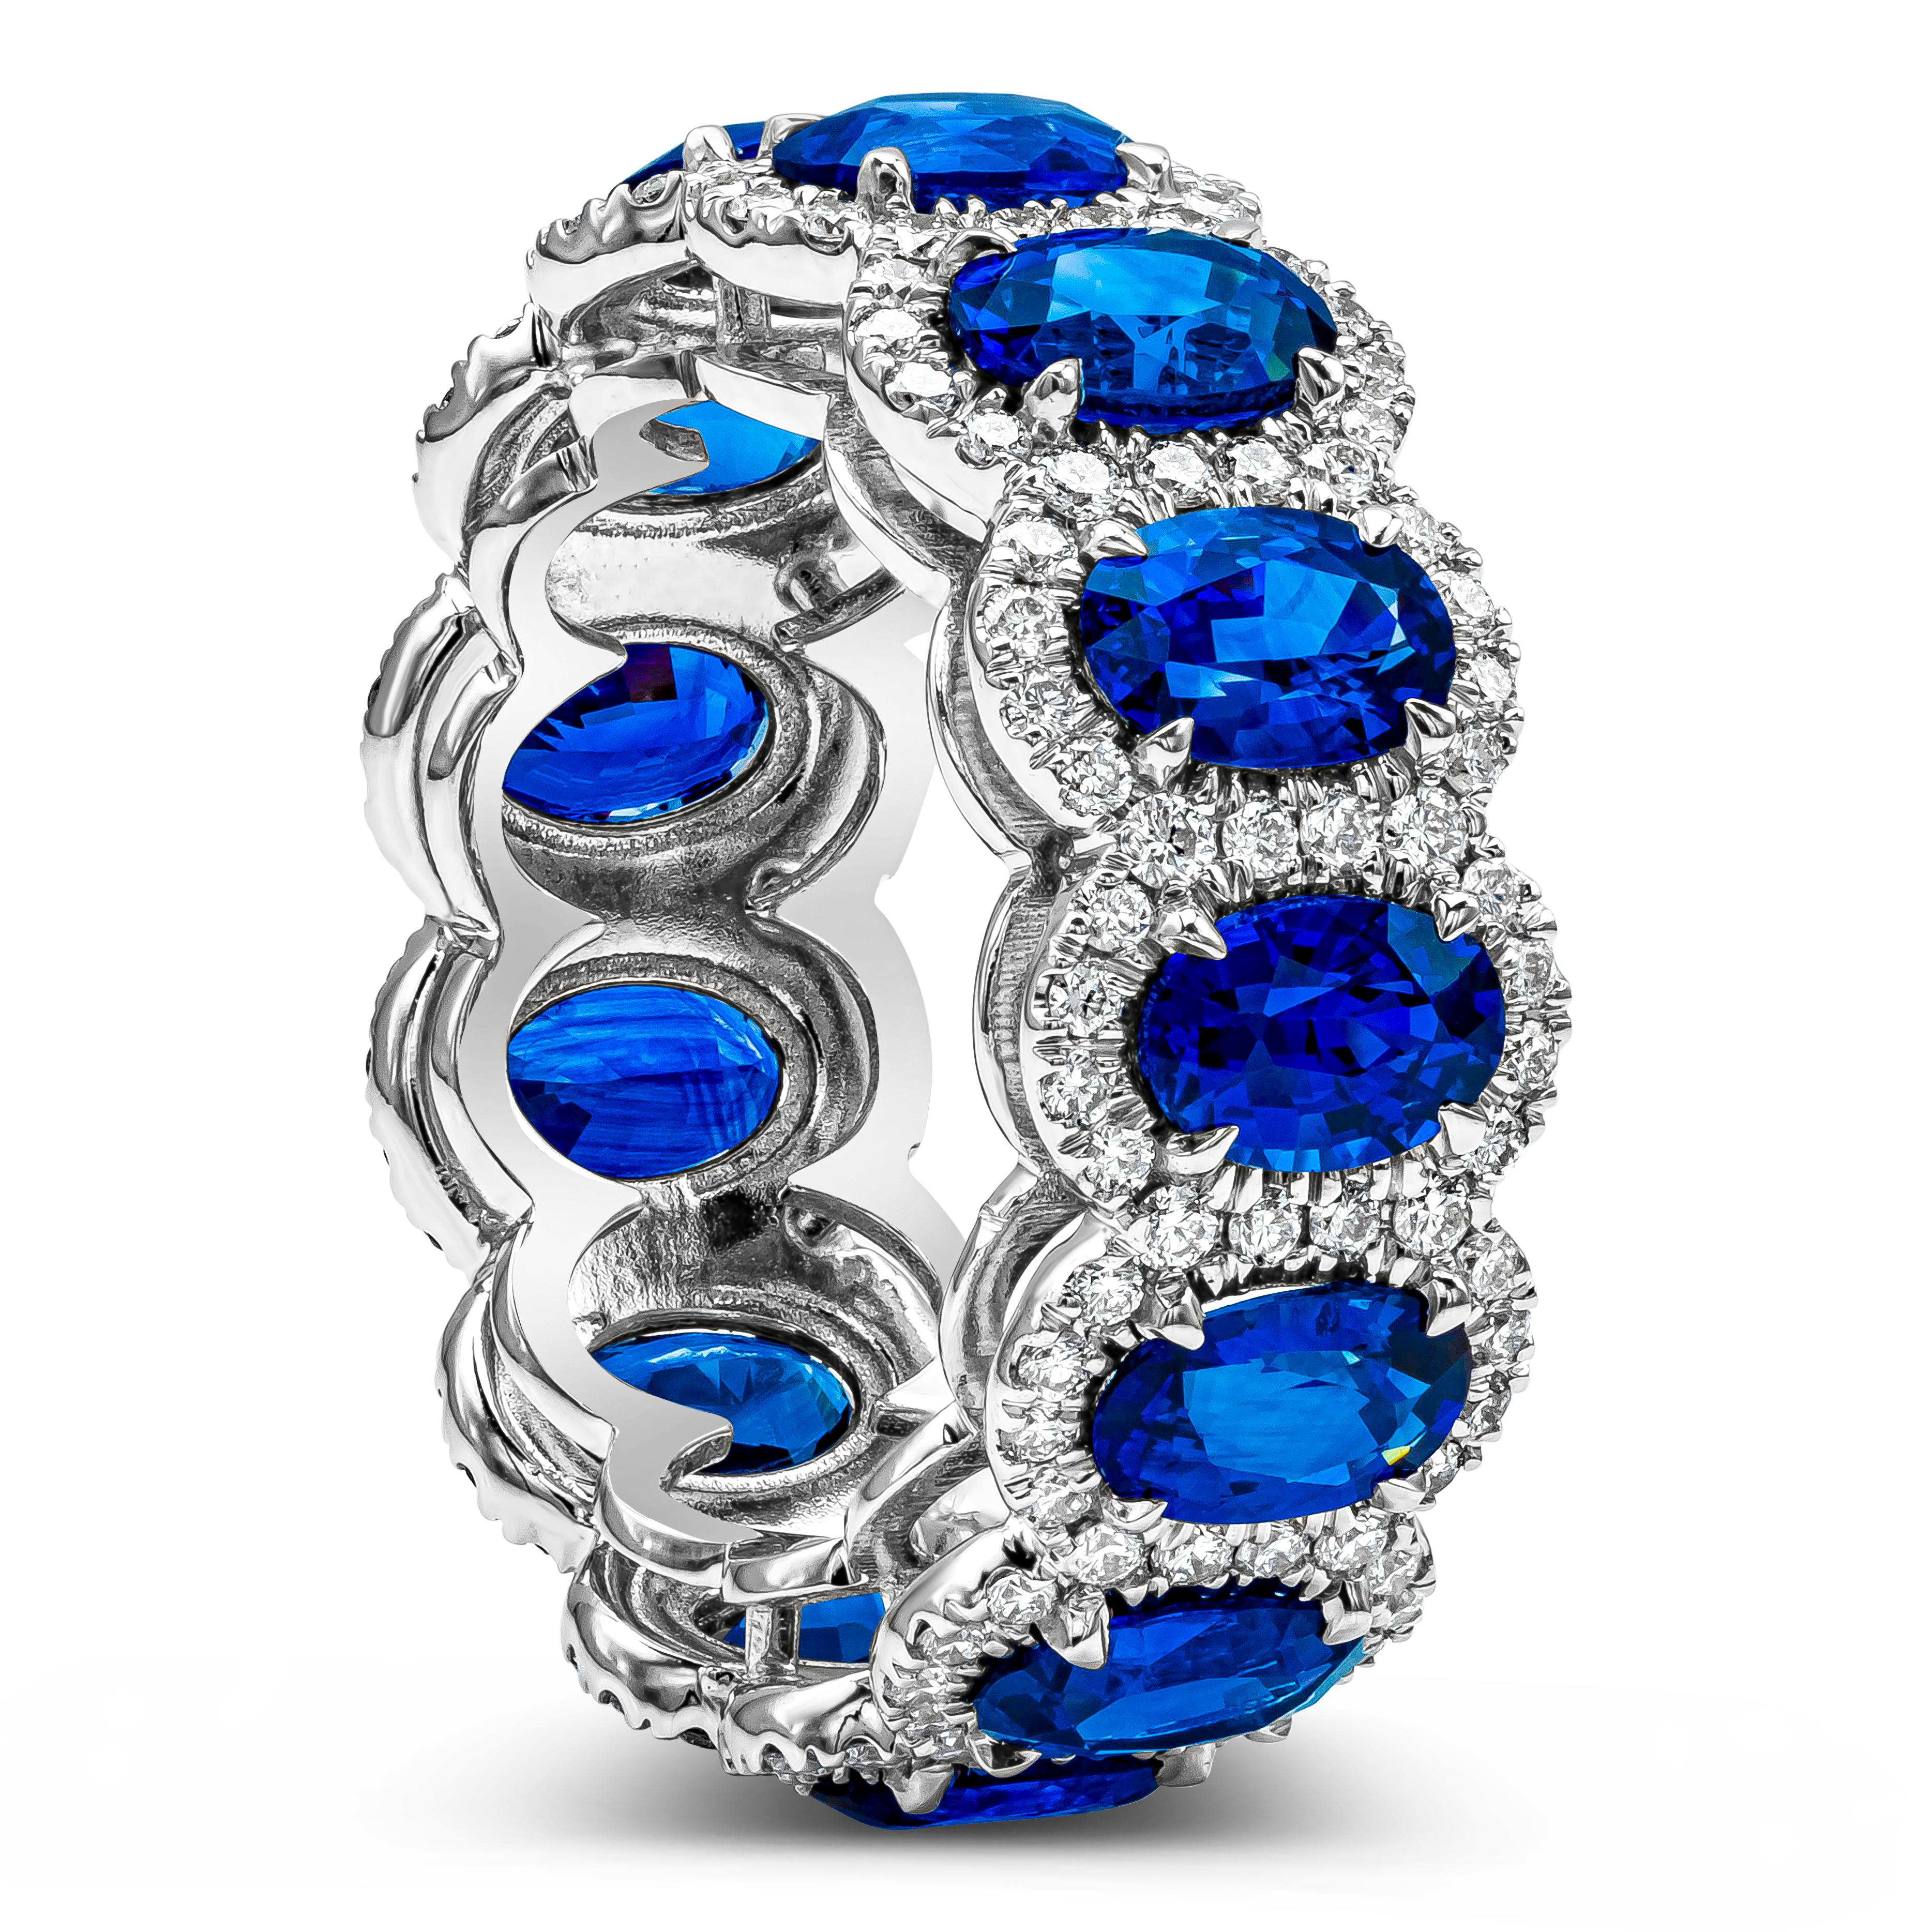 A beautiful eternity wedding band or anniversary ring showcasing a row of oval cut blue sapphires, surrounded by 156 pieces row of round brilliant diamonds. Sapphires weigh 7.18 carats total; diamonds weigh 1.05 carats total. Made with 18K White